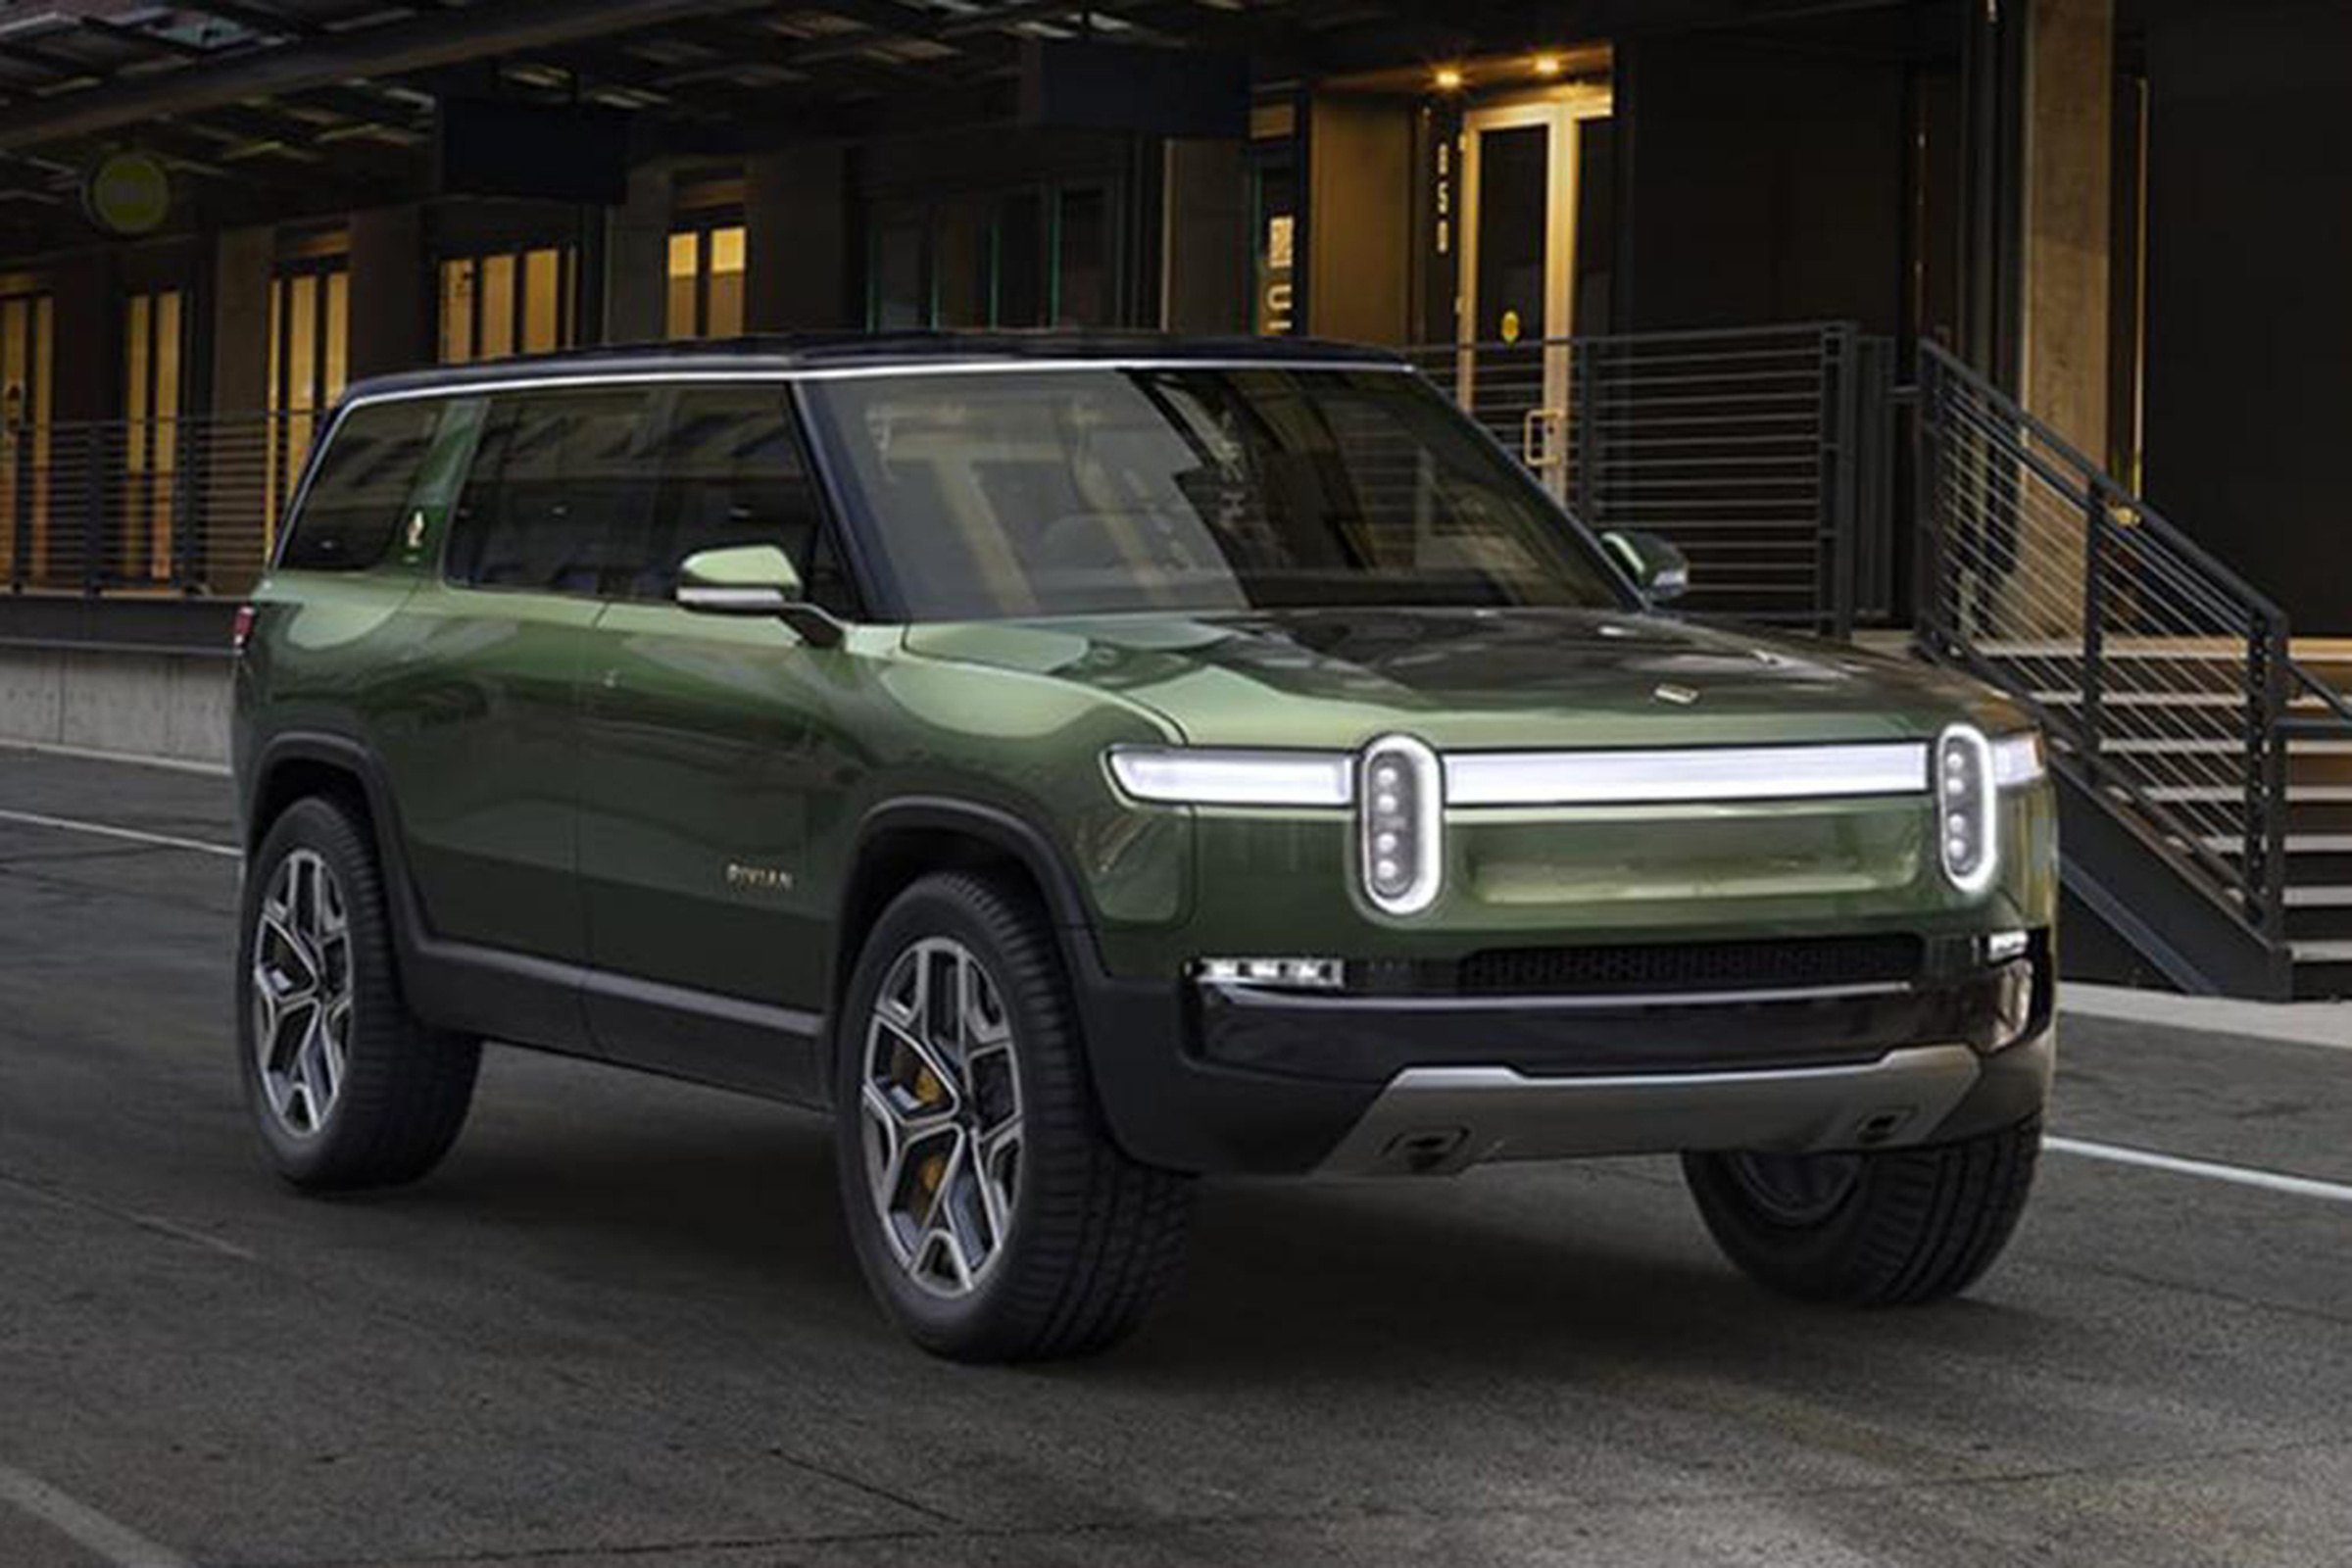 Rivian R1S electric SUV launched with seven seats and 750bhp